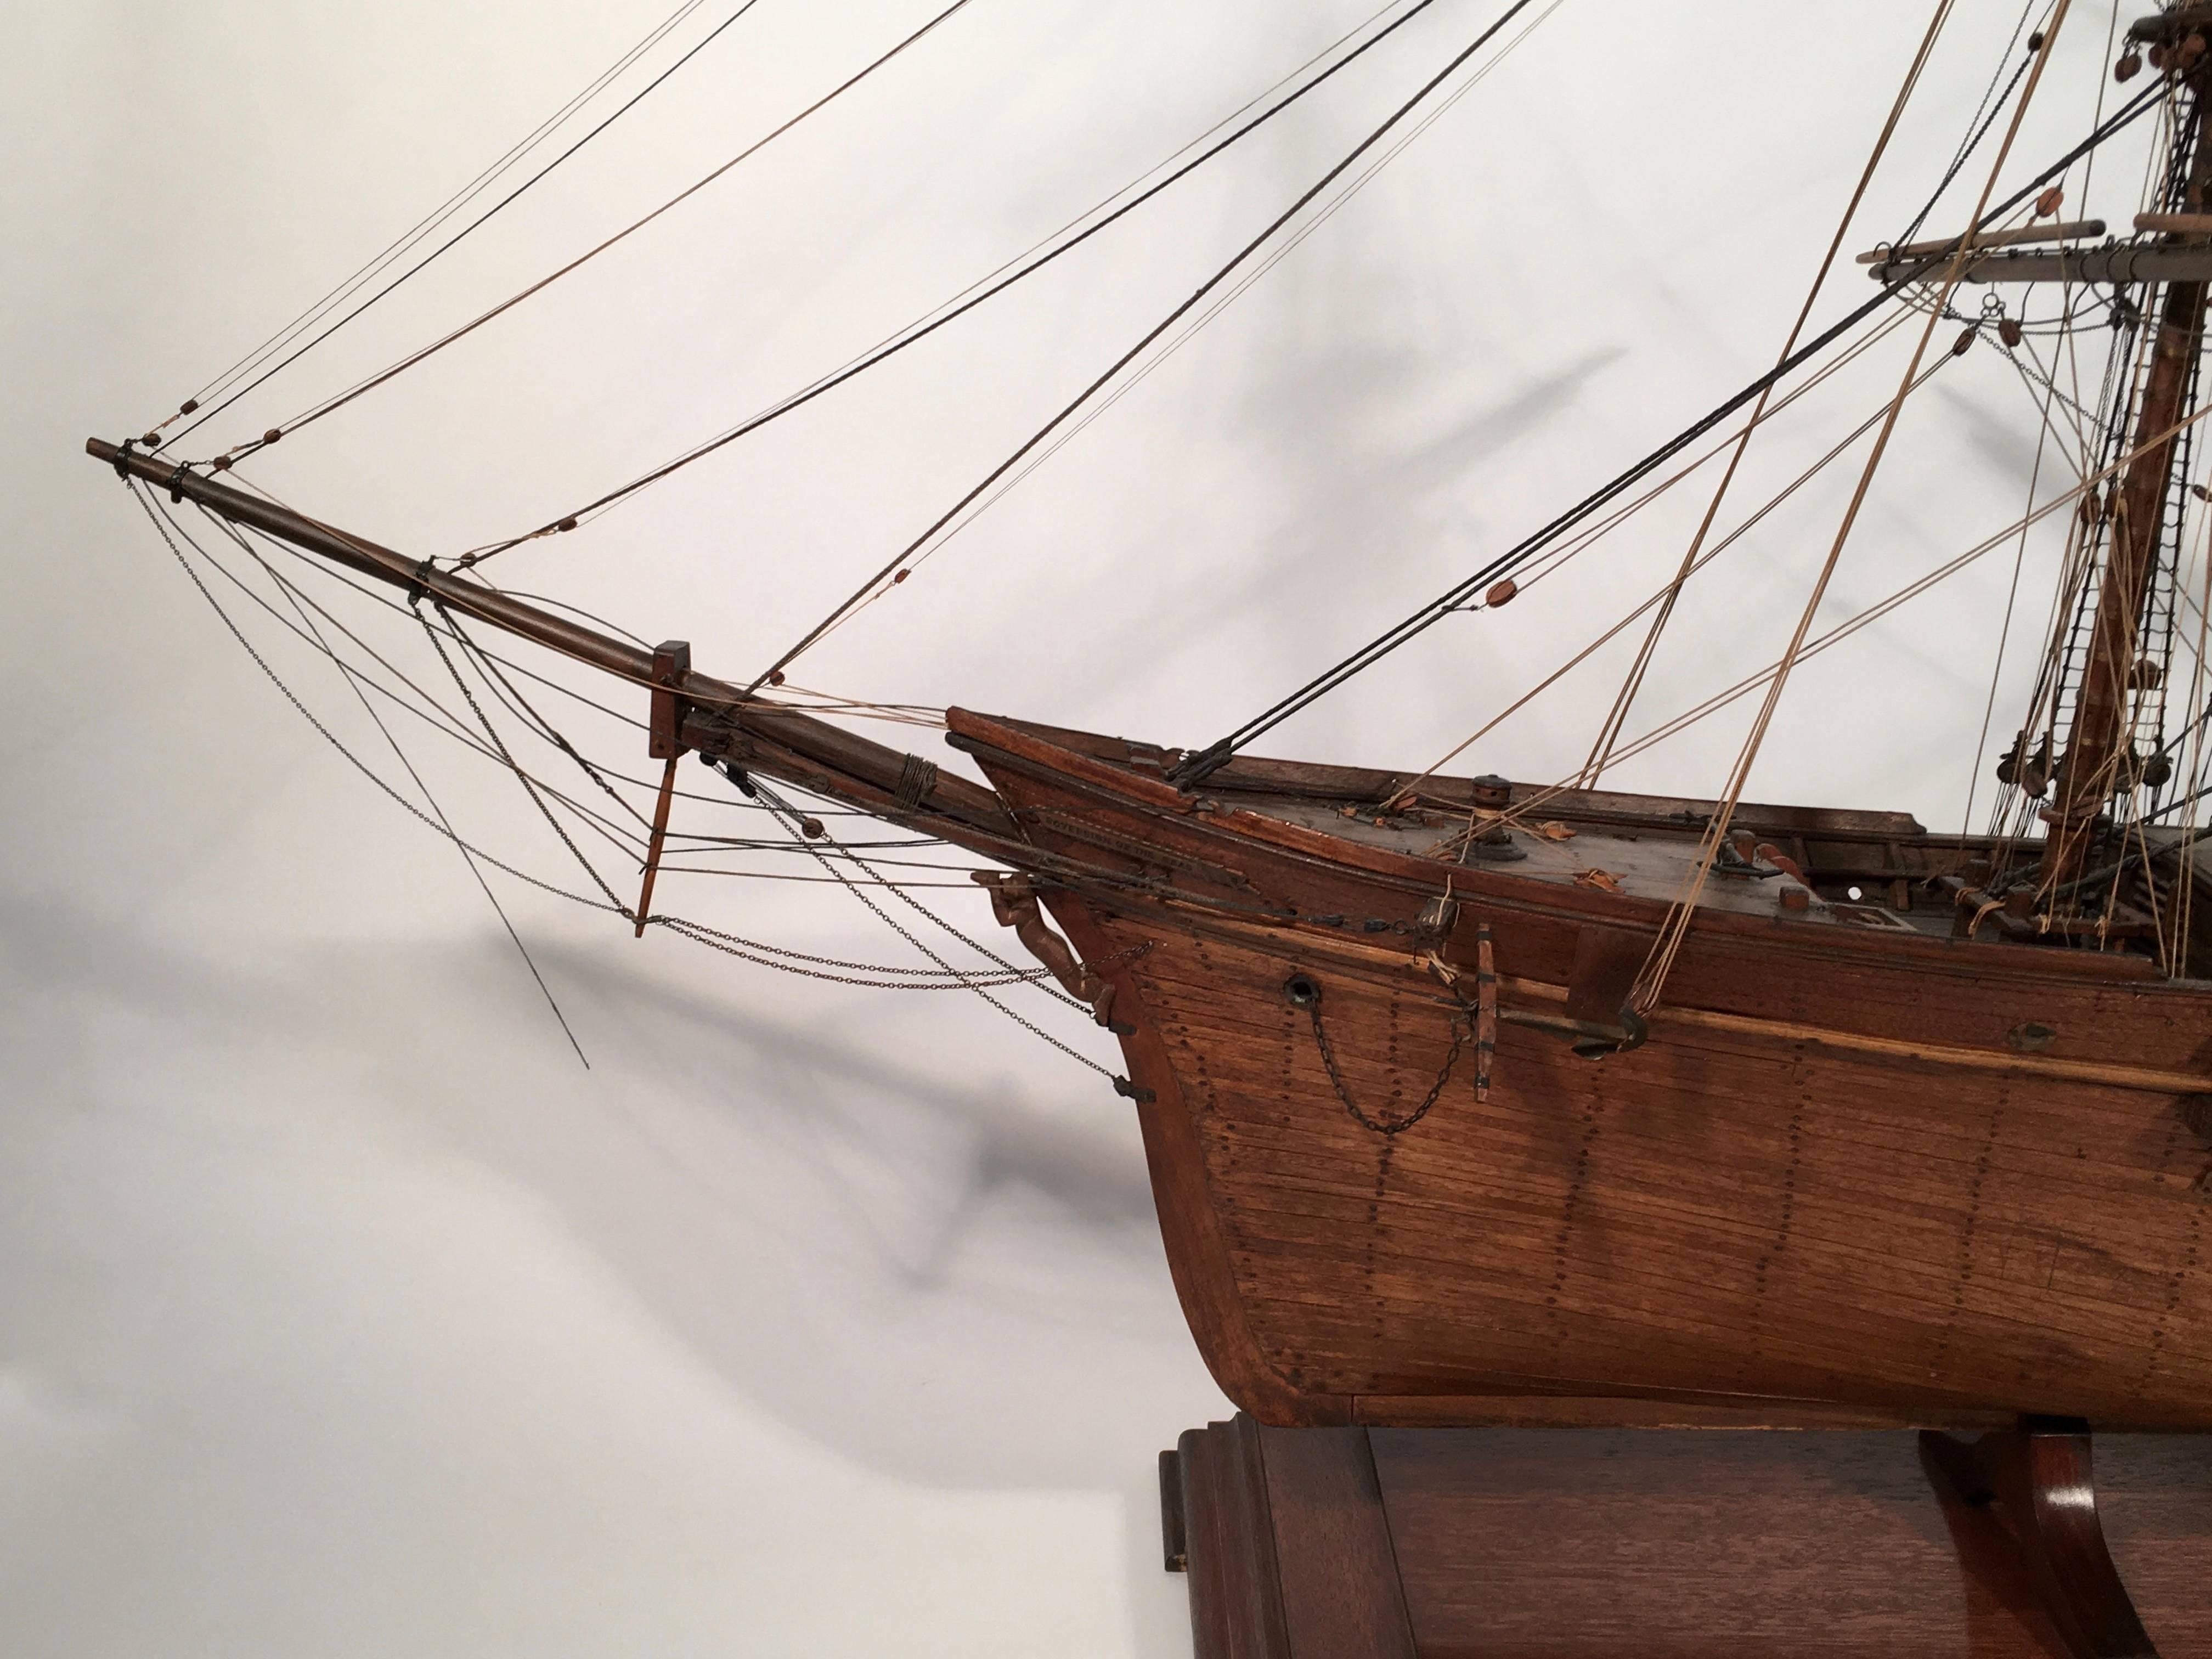 This large, beautifully made and extraordinarily well detailed, carved wood model of the celebrated clipper ship, Sovereign of the Seas, comes from the Independence Seaport Museum in Philadelphia which deaccessioned it because they focus exclusively